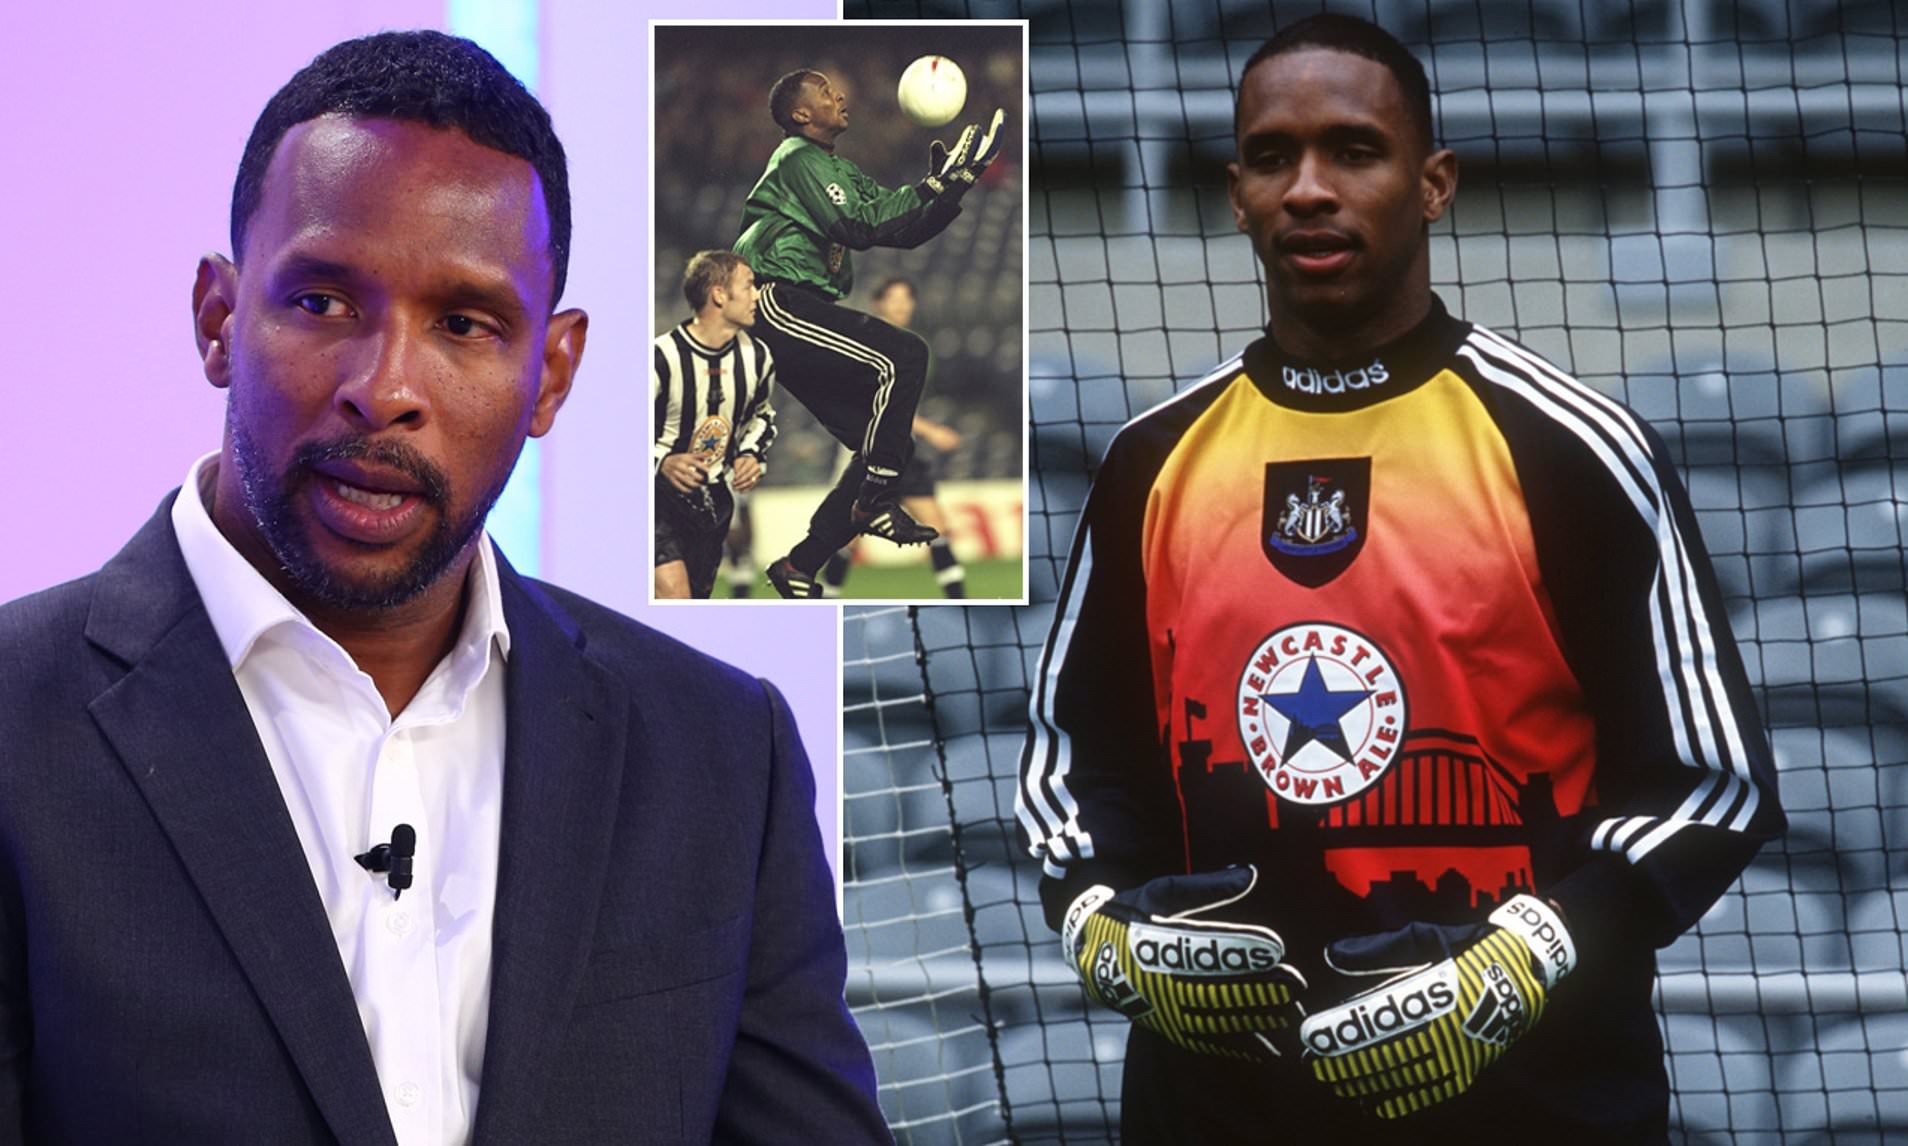 Ex-Newcastle star Shaka Hislop reveals how vile racist abuse left him 'scared for his life' | Daily Mail Online